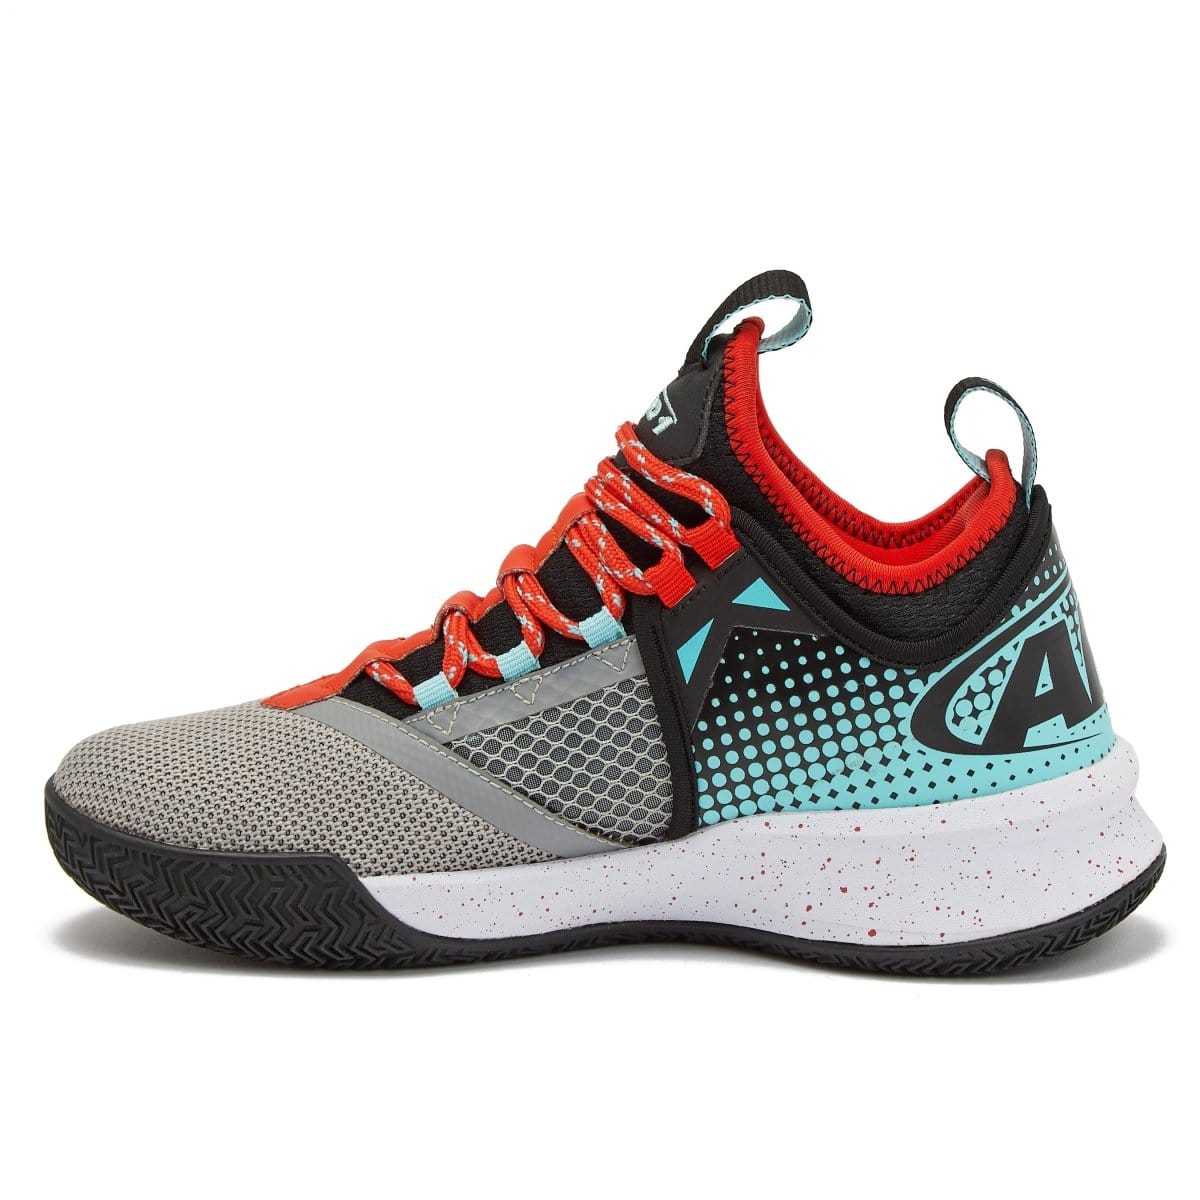 AND-1 AND-1 JUNIOR CHARGE GREY BASKETBALL SHOES - INSPORT